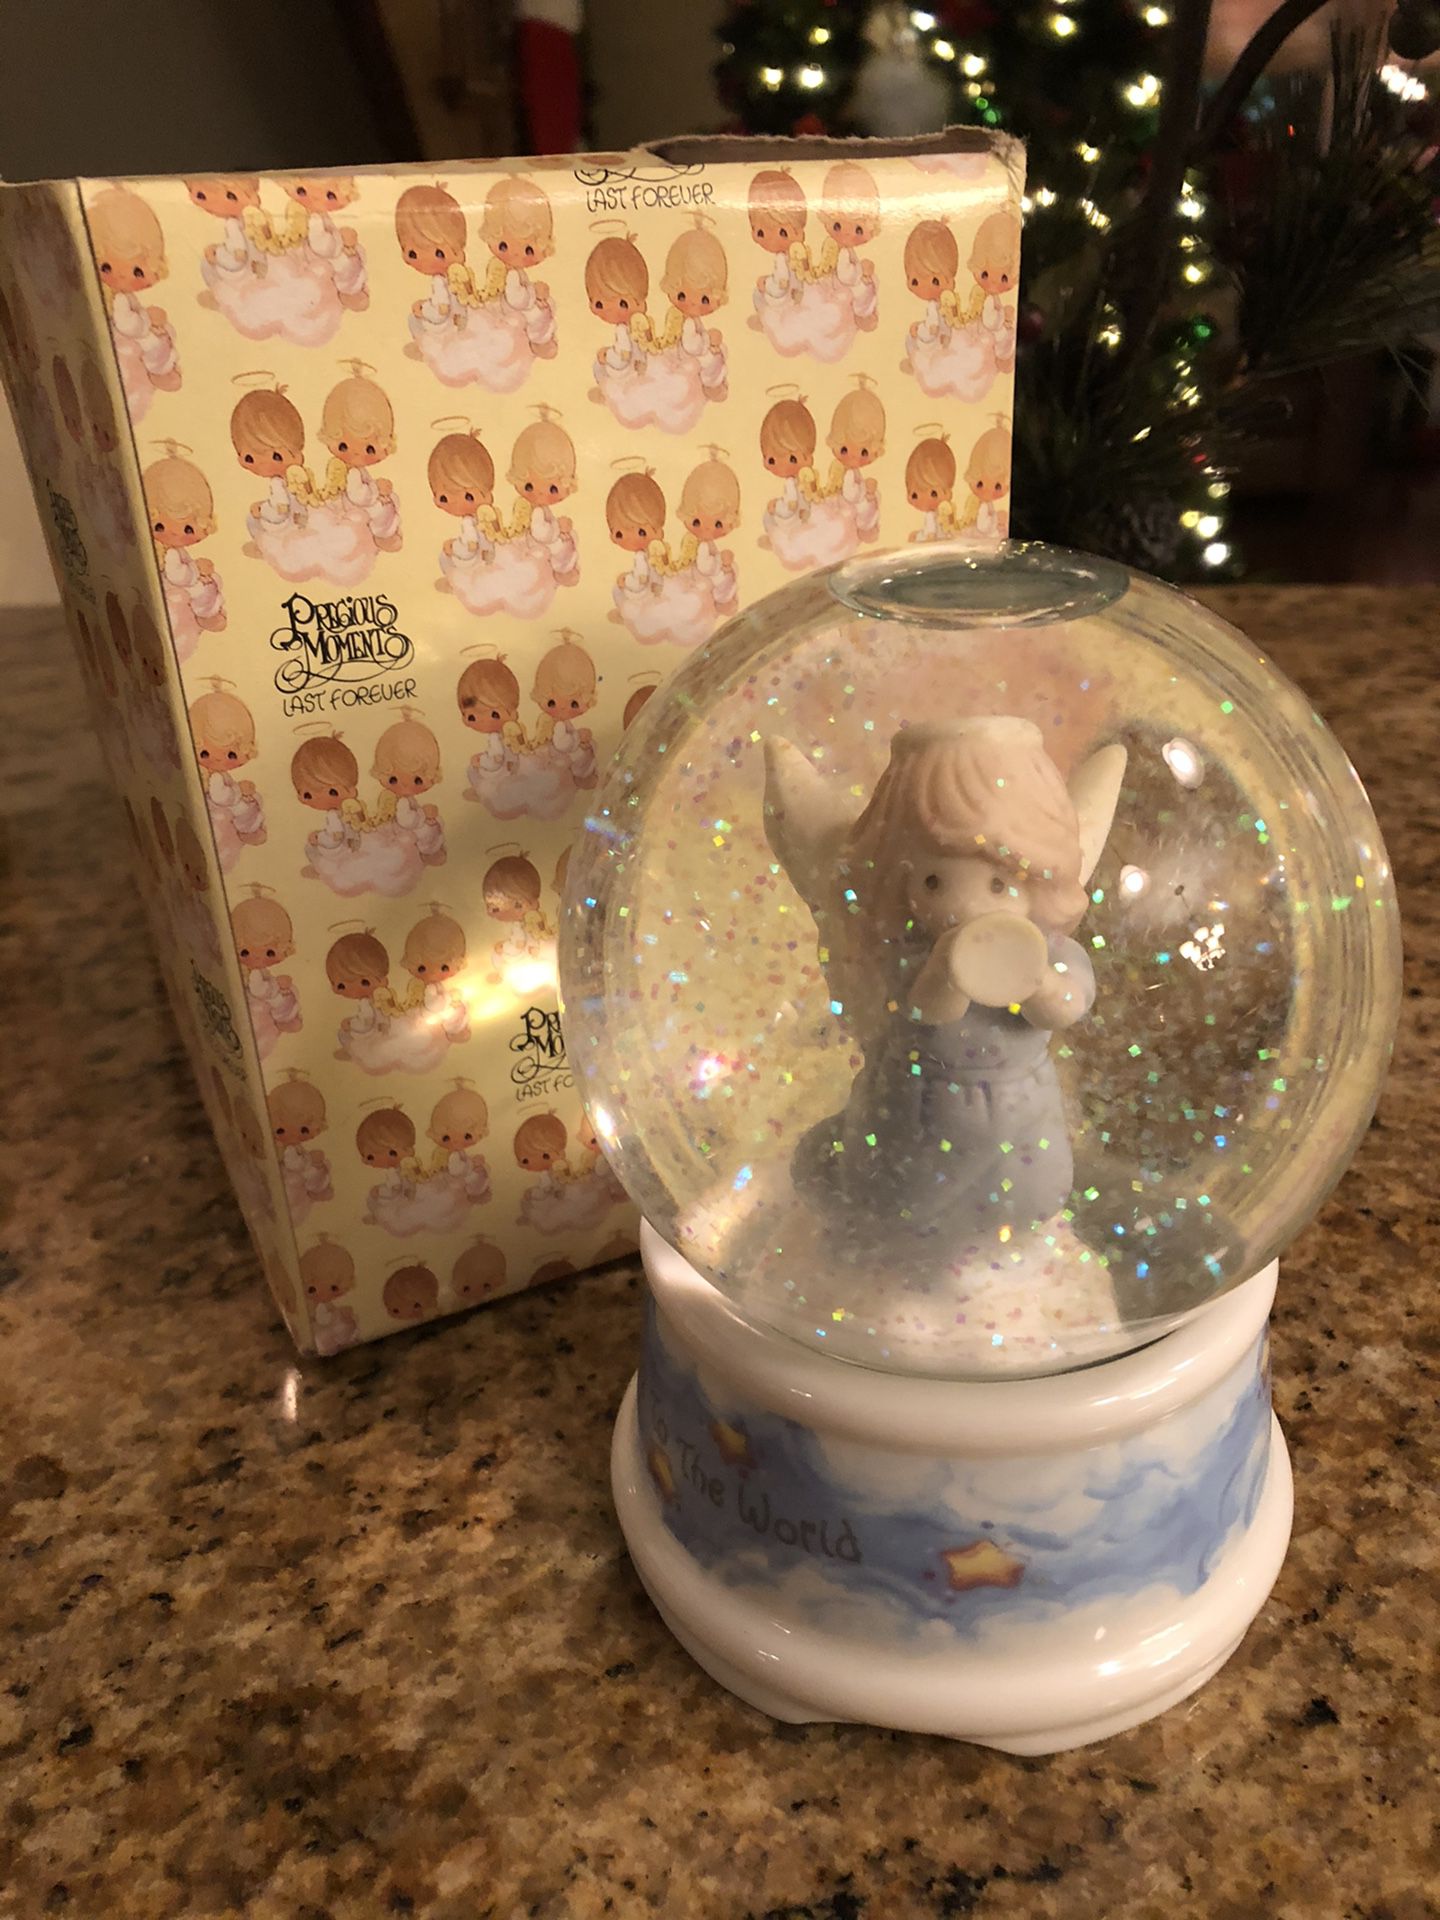 (WILL TAKE BEST OFFER) Precious moment musical globe playing joy to the world